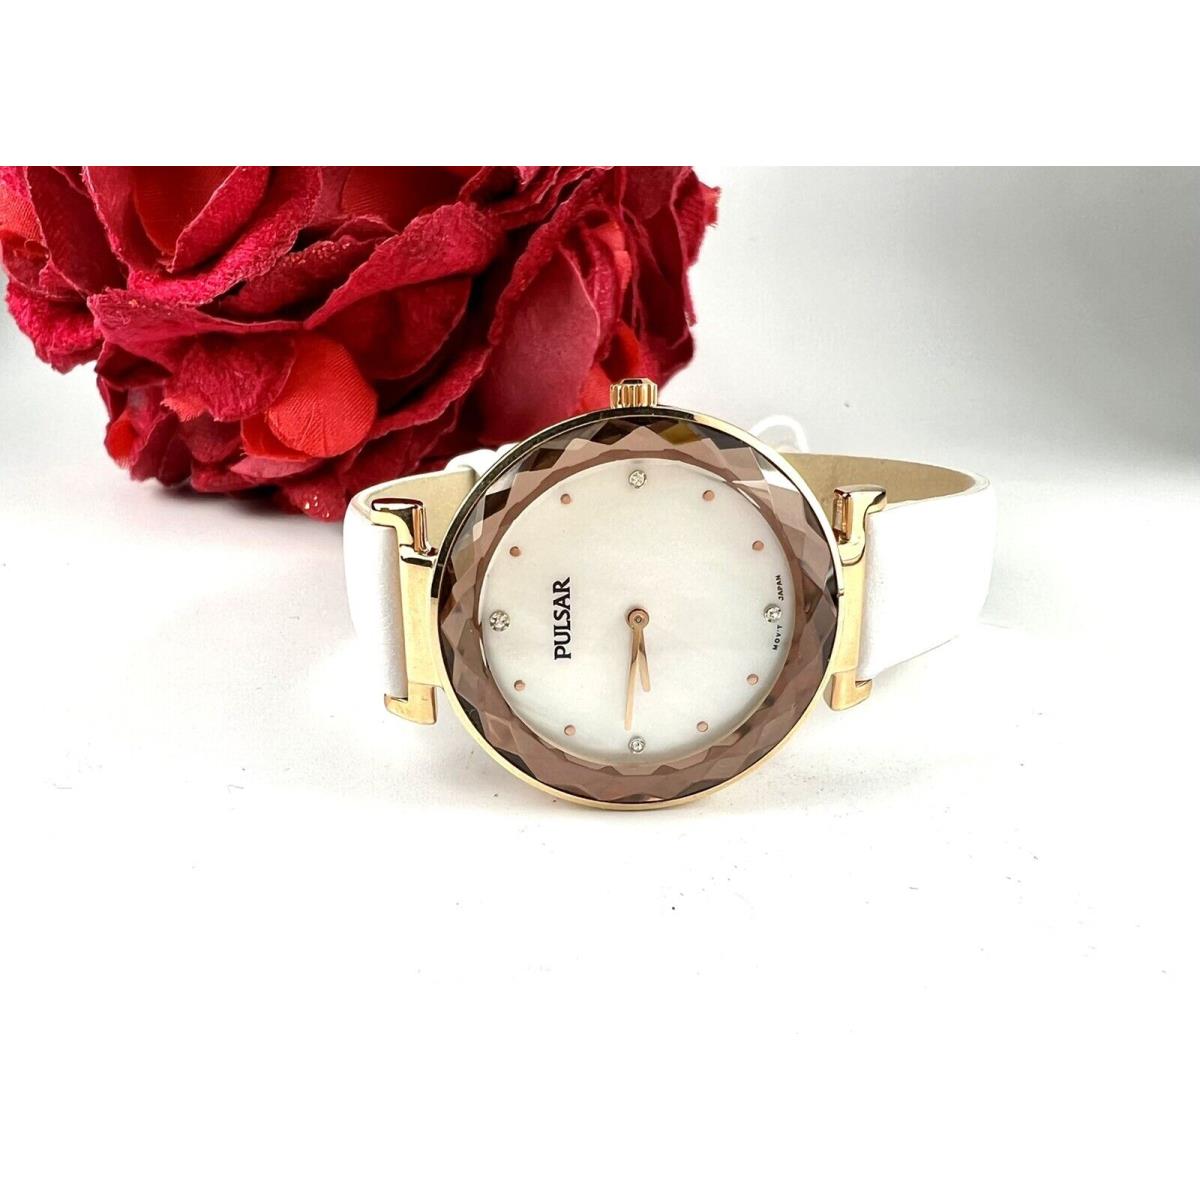 Pulsar Woman s Watch Faceted Crystal Rose Gold Tone White Band Swarovski Crystal